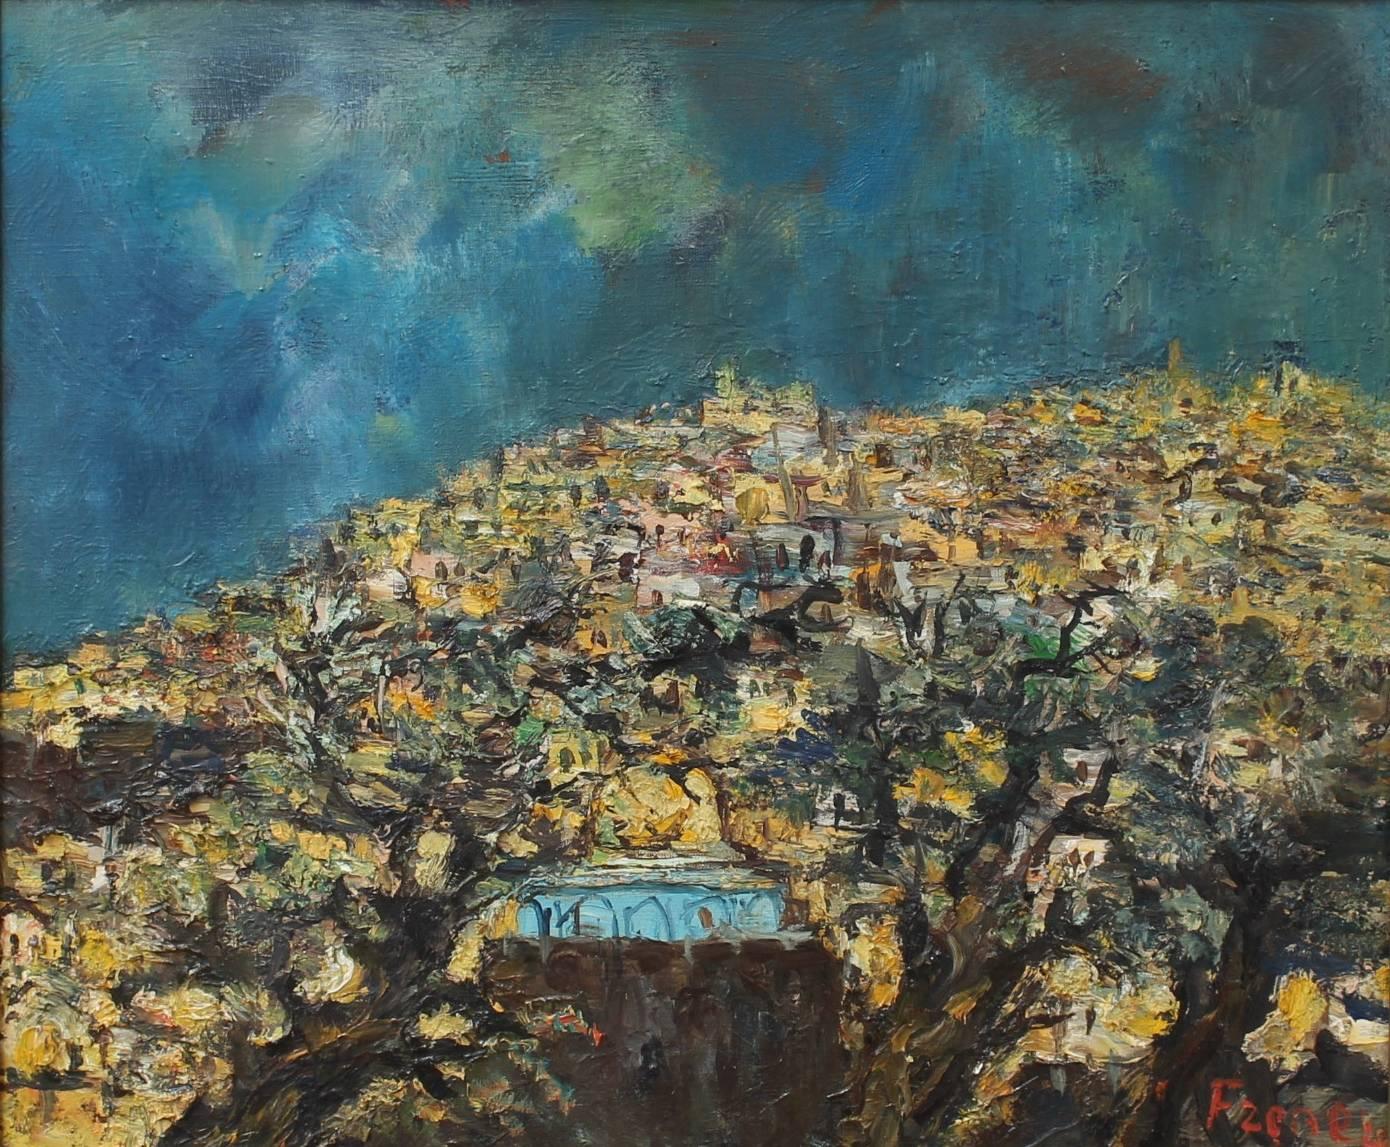 'Jerusalem', (c. 1960s) oil on canvas, by Yitzhak Frenkel-Frenel (1899 - 1981). Frenel frequently painted the ancient synagogues, narrow lanes, surrounding countryside and local inhabitants where he lived. In this work the viewer glimpses the Dome